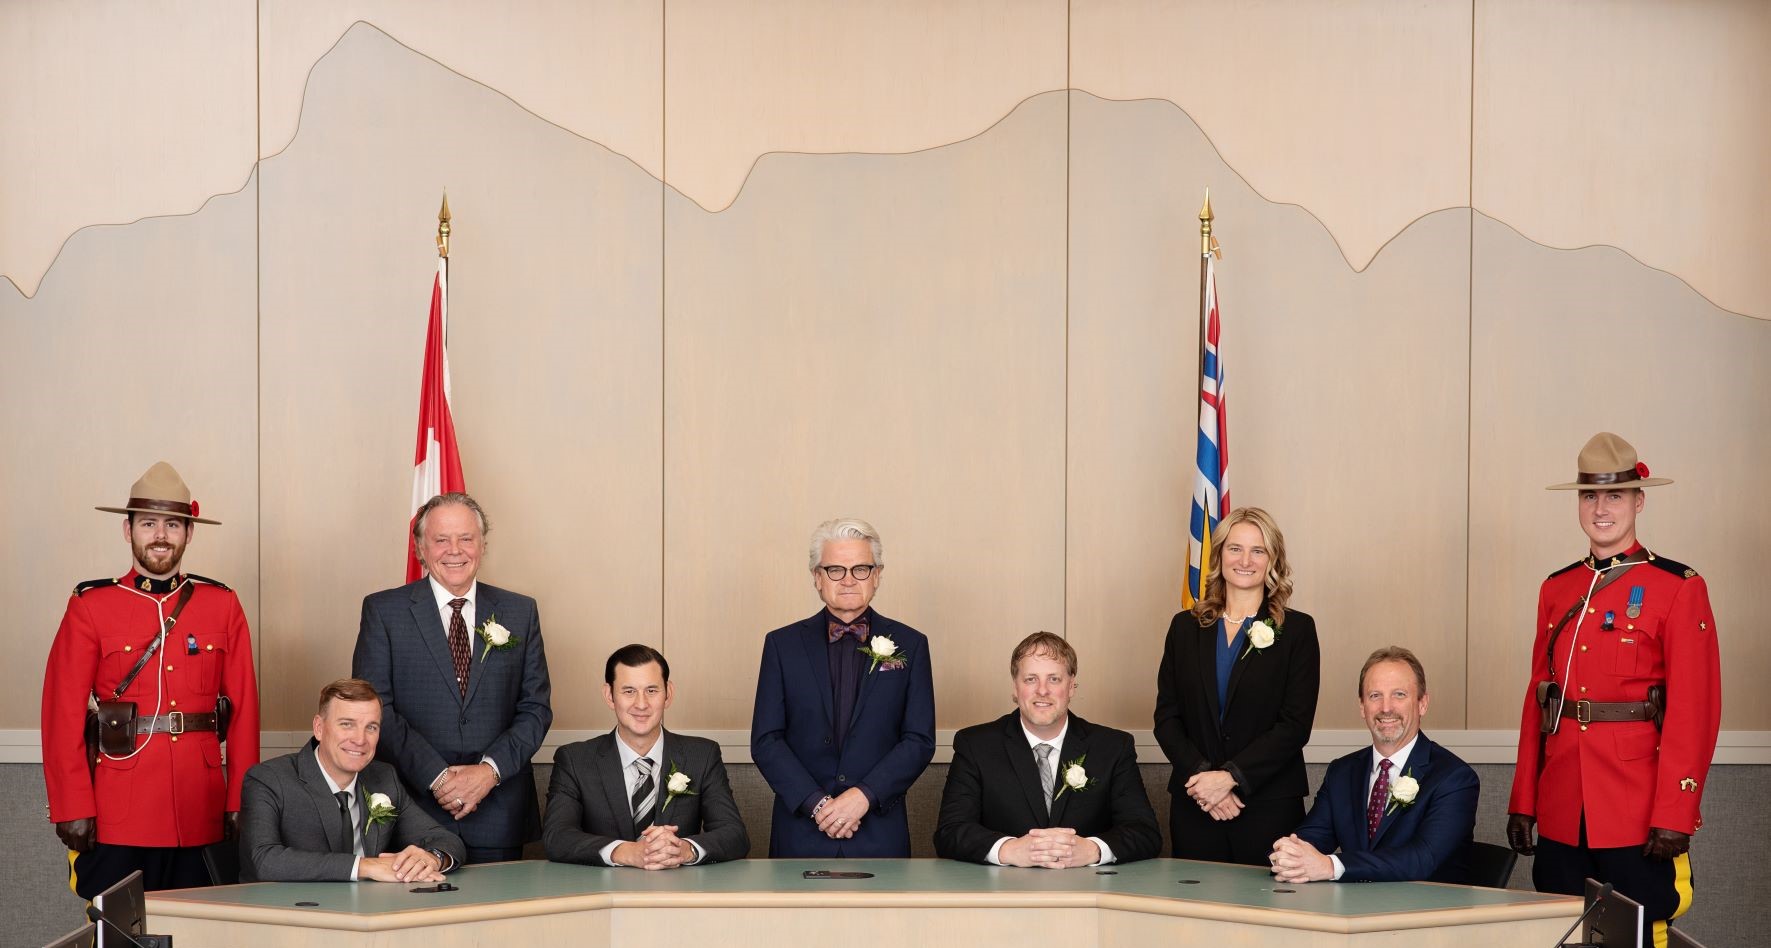 Mayor and Council in Council Chambers, with an RCMP officer in red serge on either side.